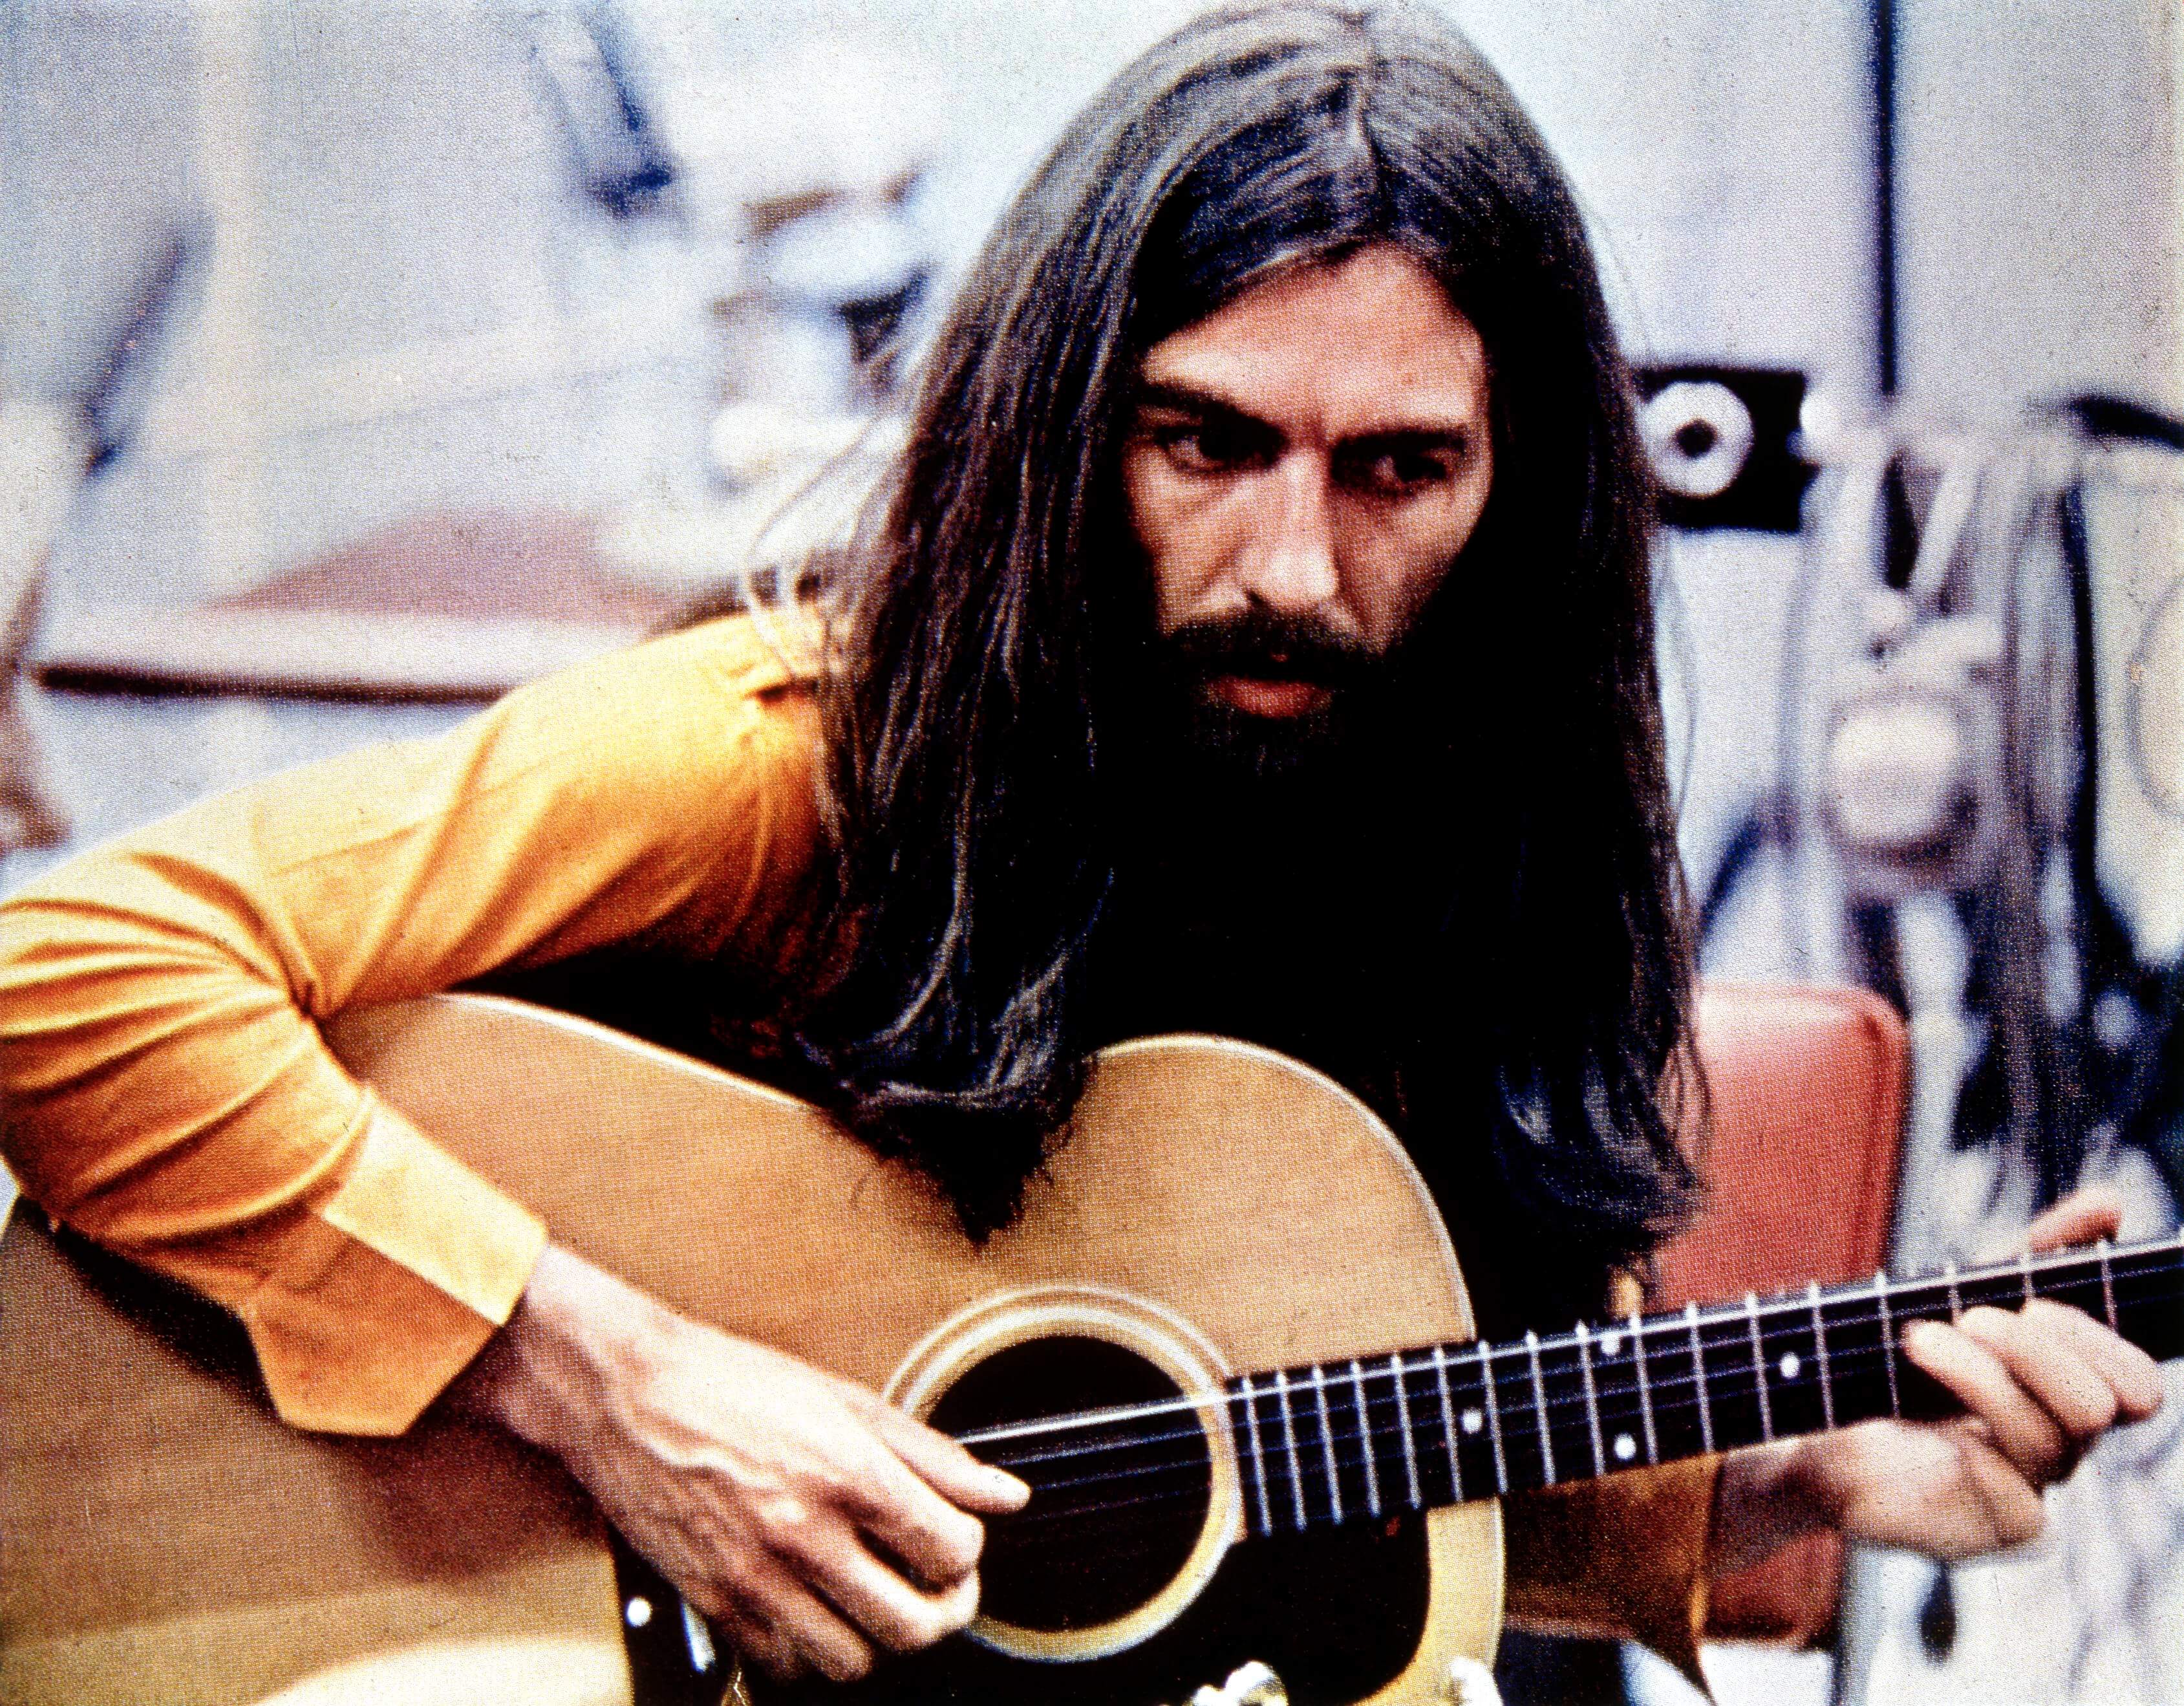 "My Sweet Lord" singer George Harrison with a guitar